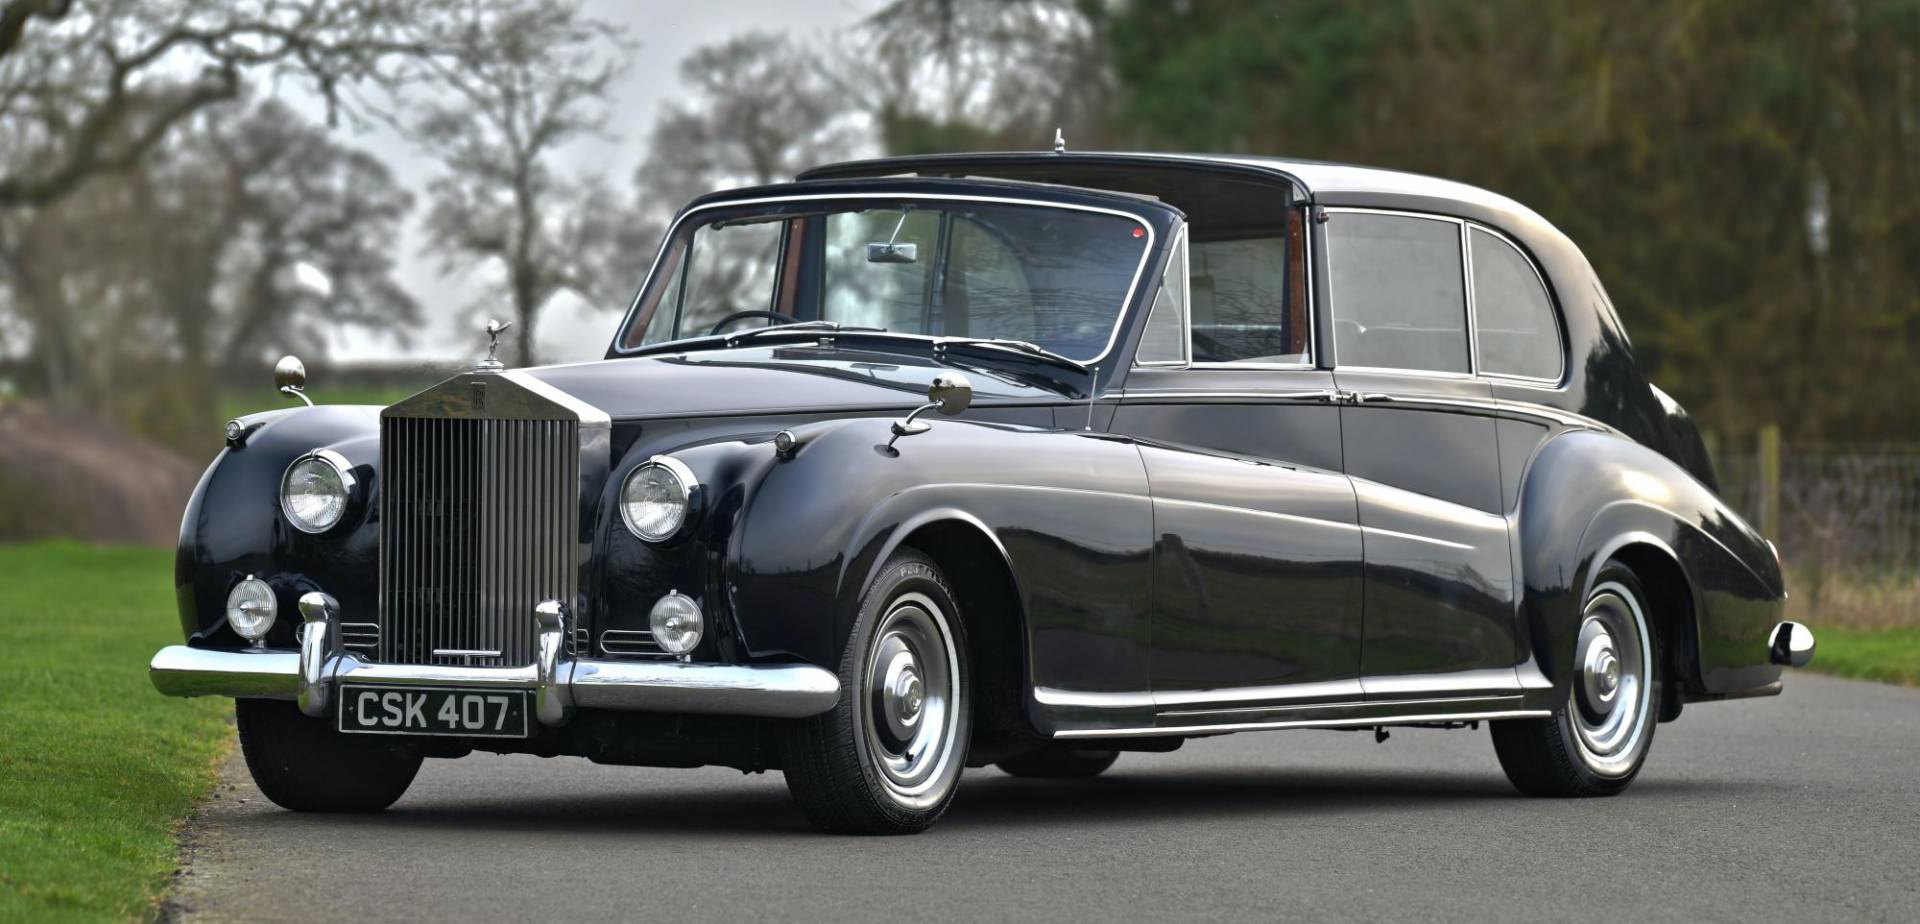 Bask in the majesty of this 500k fullyelectric RollsRoyce  Top Gear